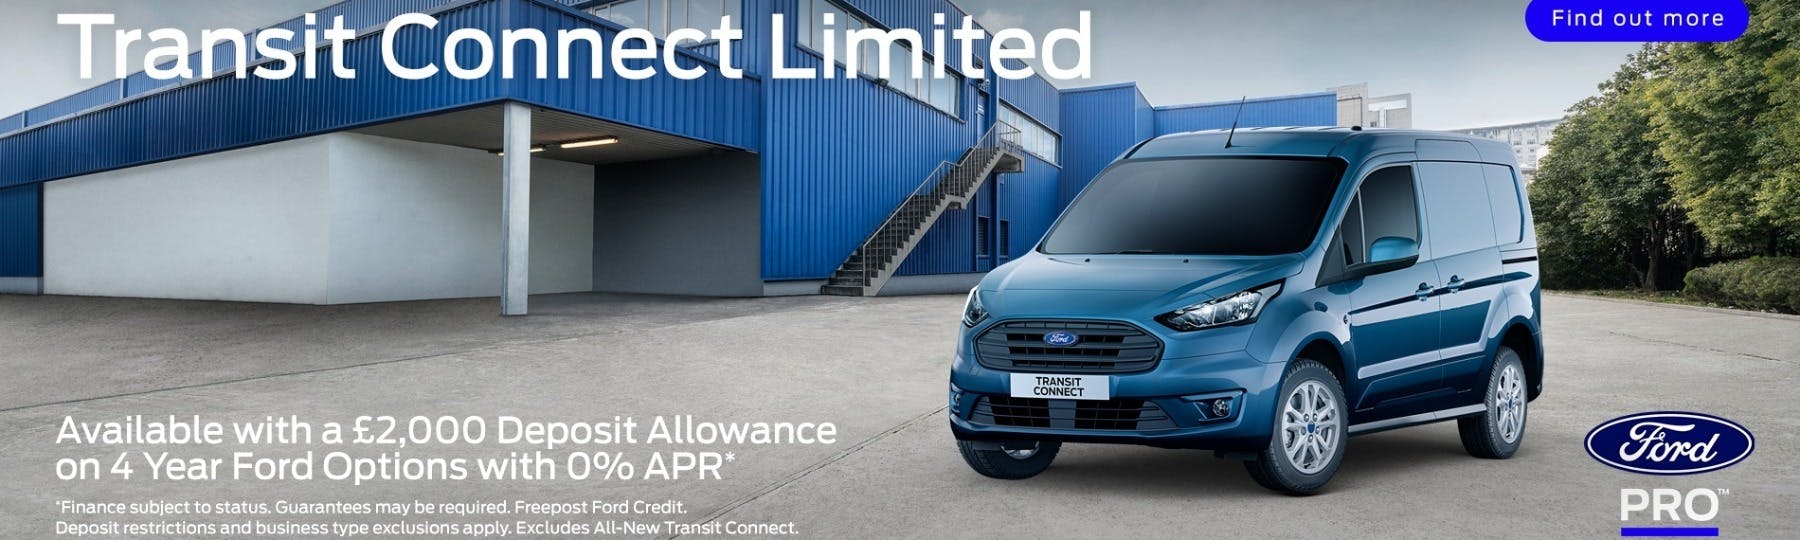 ford Transit Connect New Van Offer